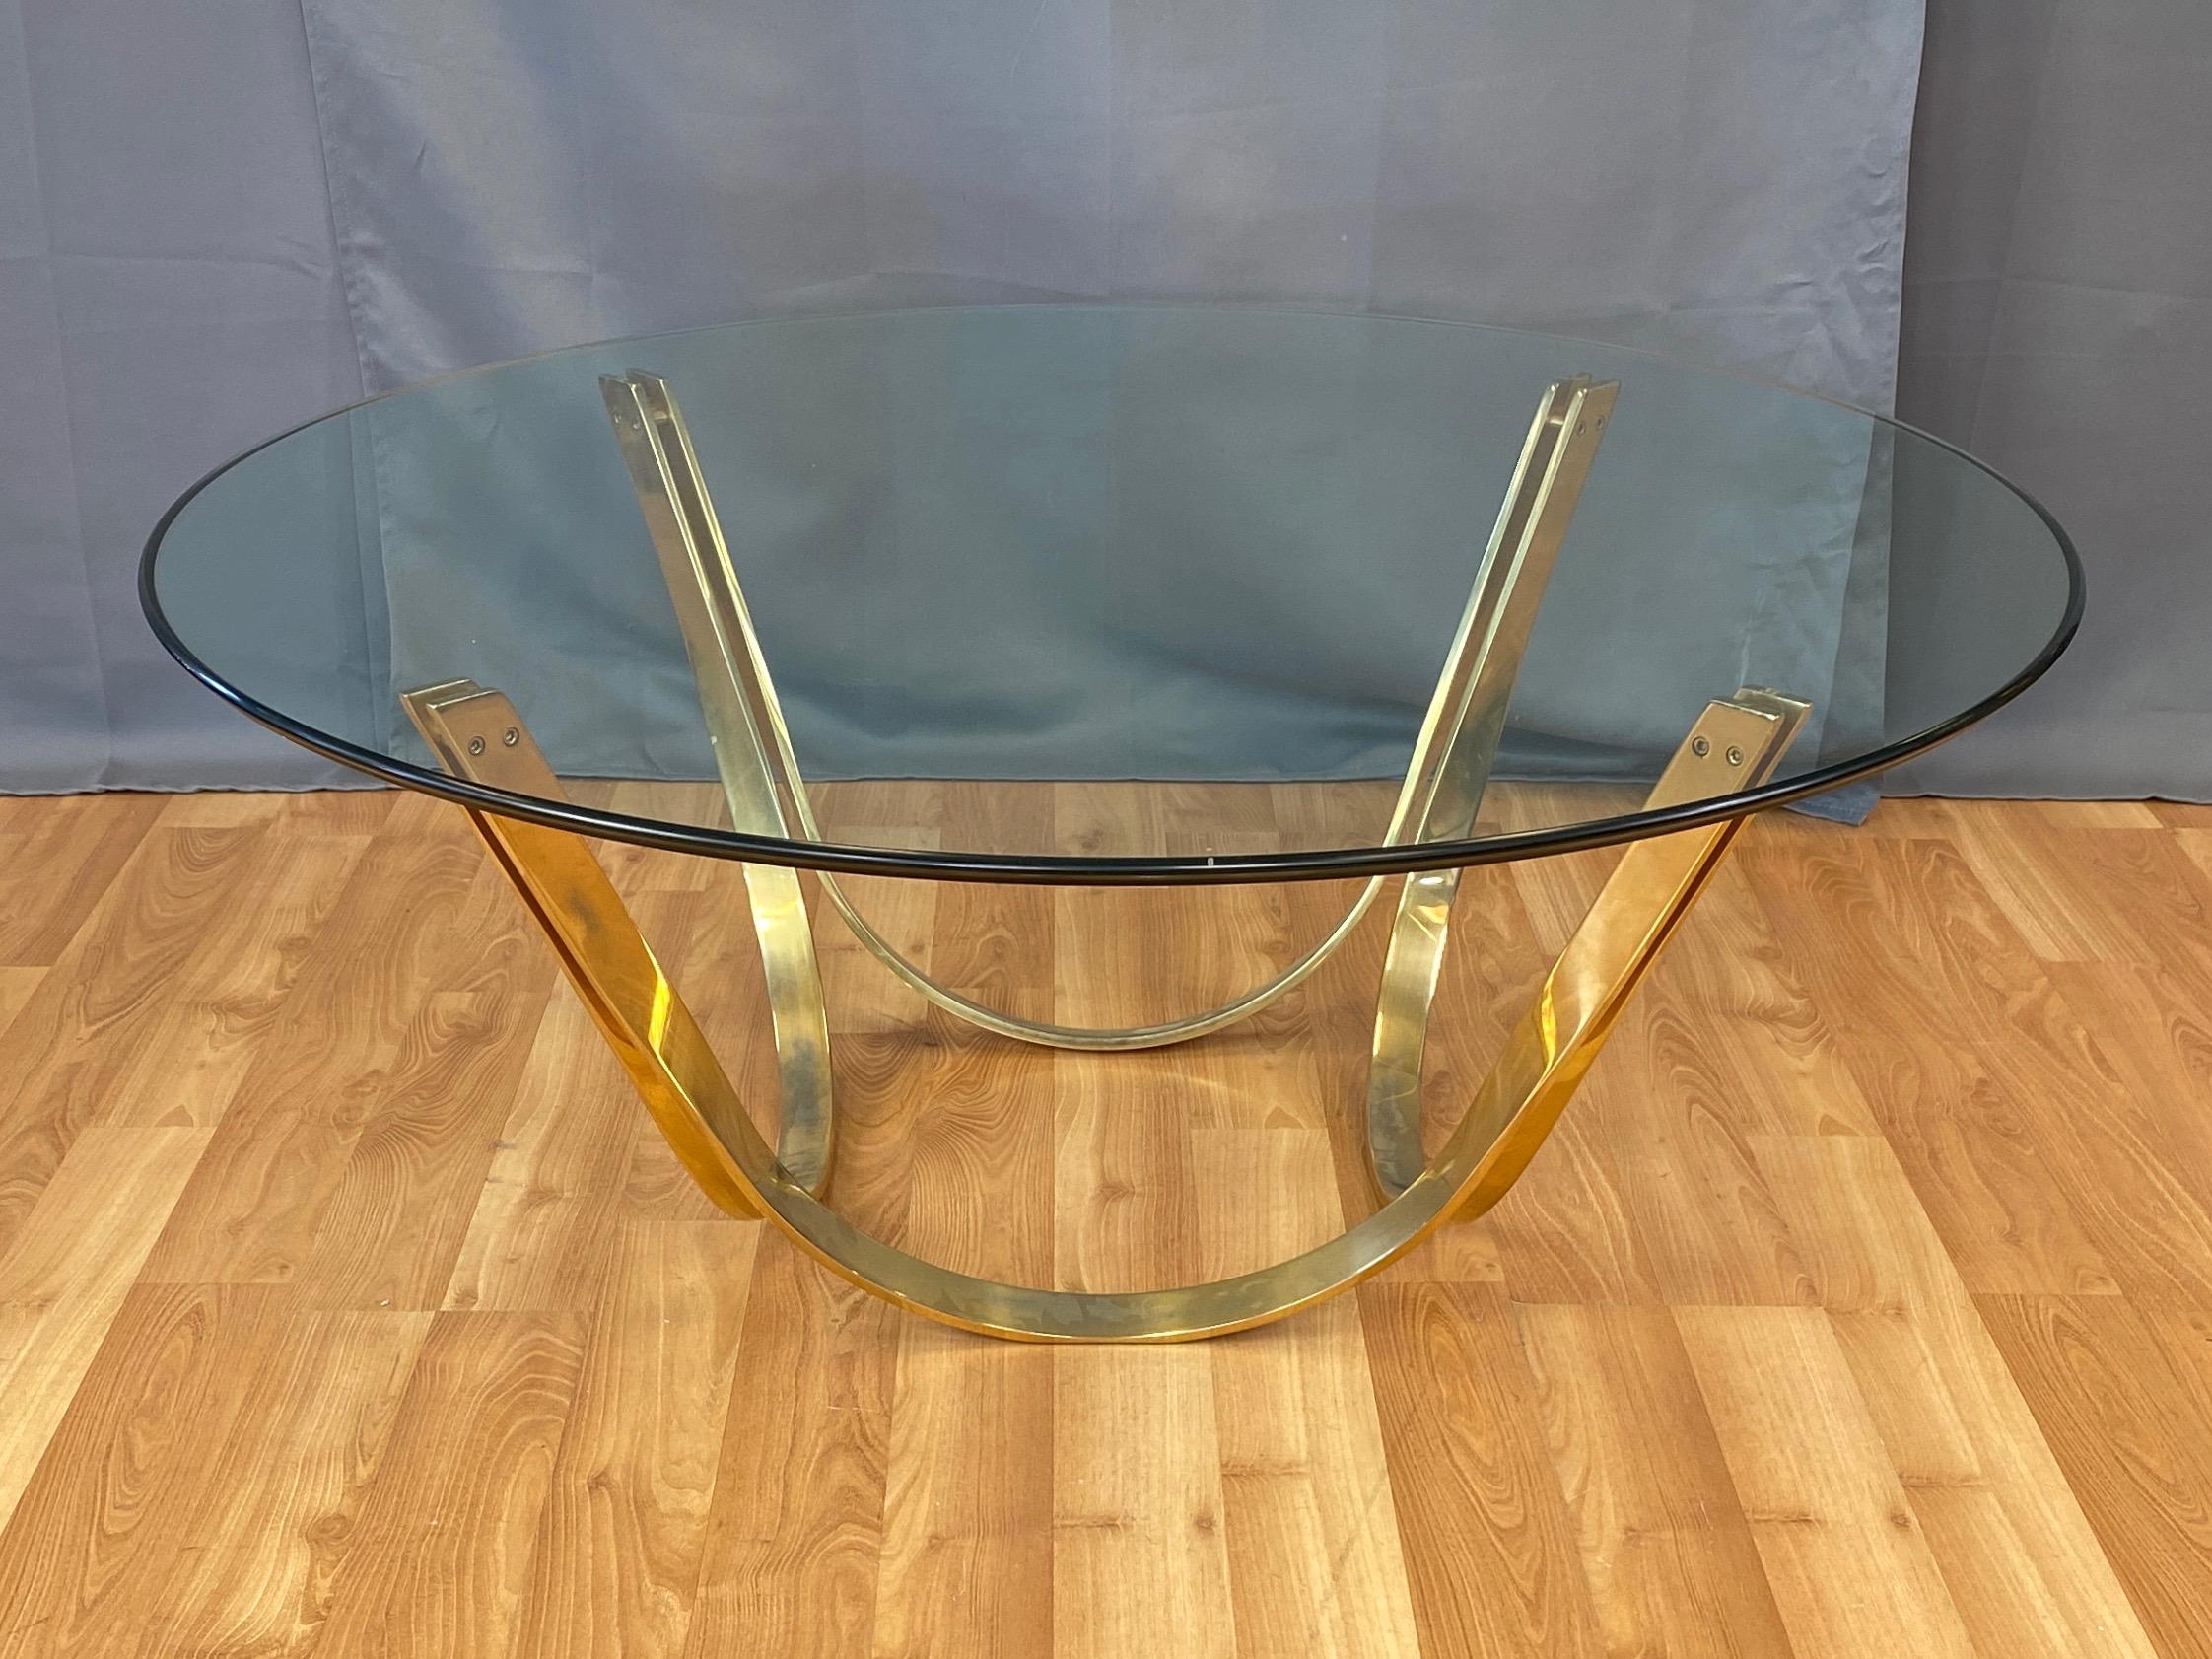 American TriMark Brass-Plated Steel & Glass Coffee Table after Sprunger for Dunbar, 1970s